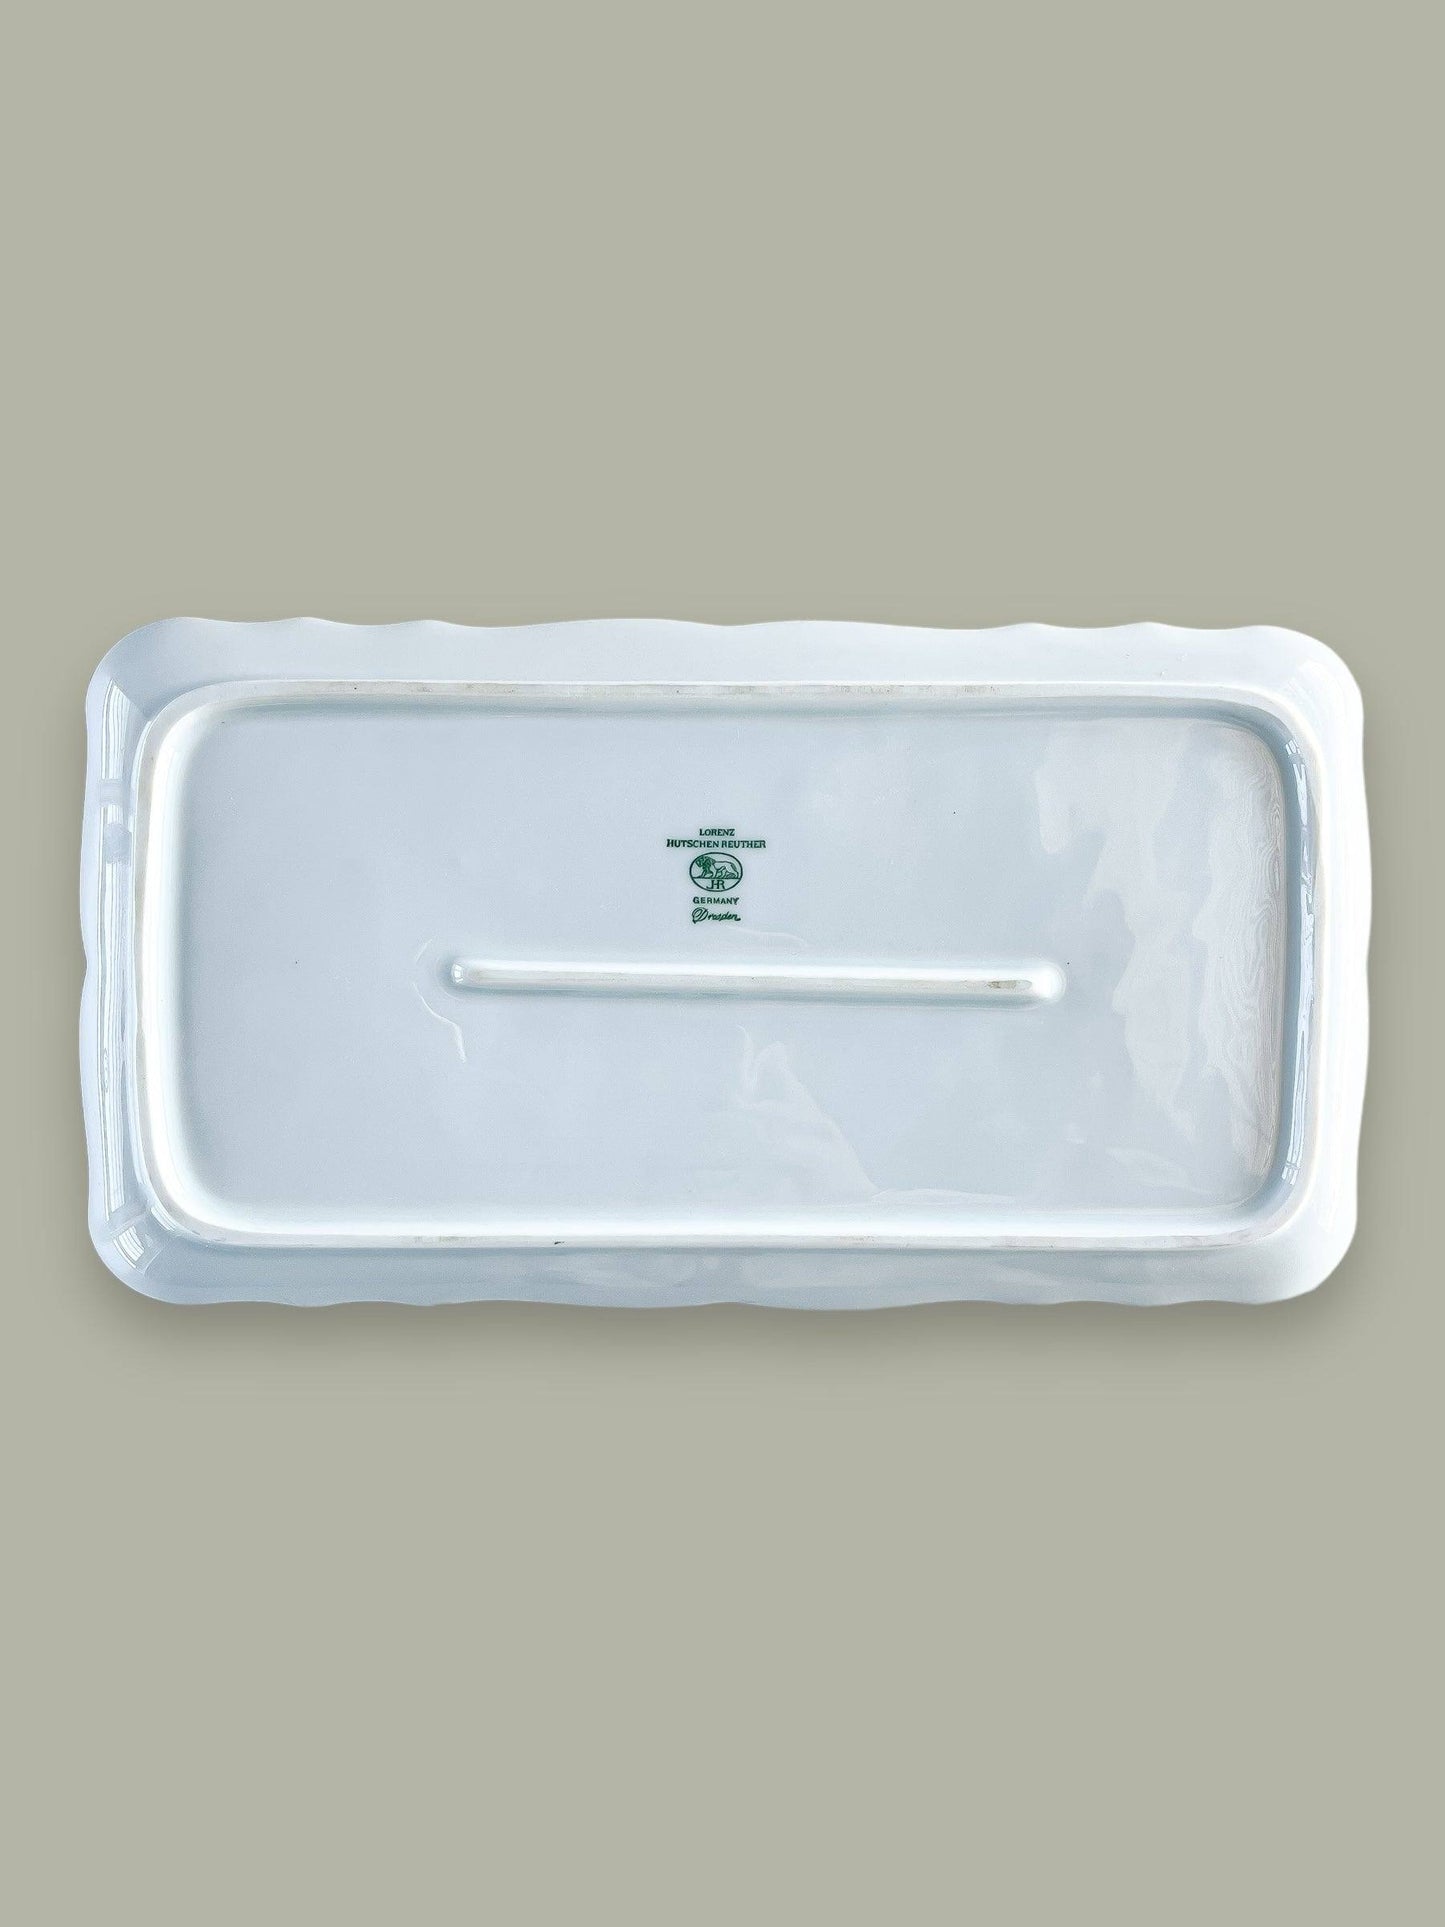 Hutschenreuther Sandwich Tray - 'Dresden' Collection in White - SOSC Home